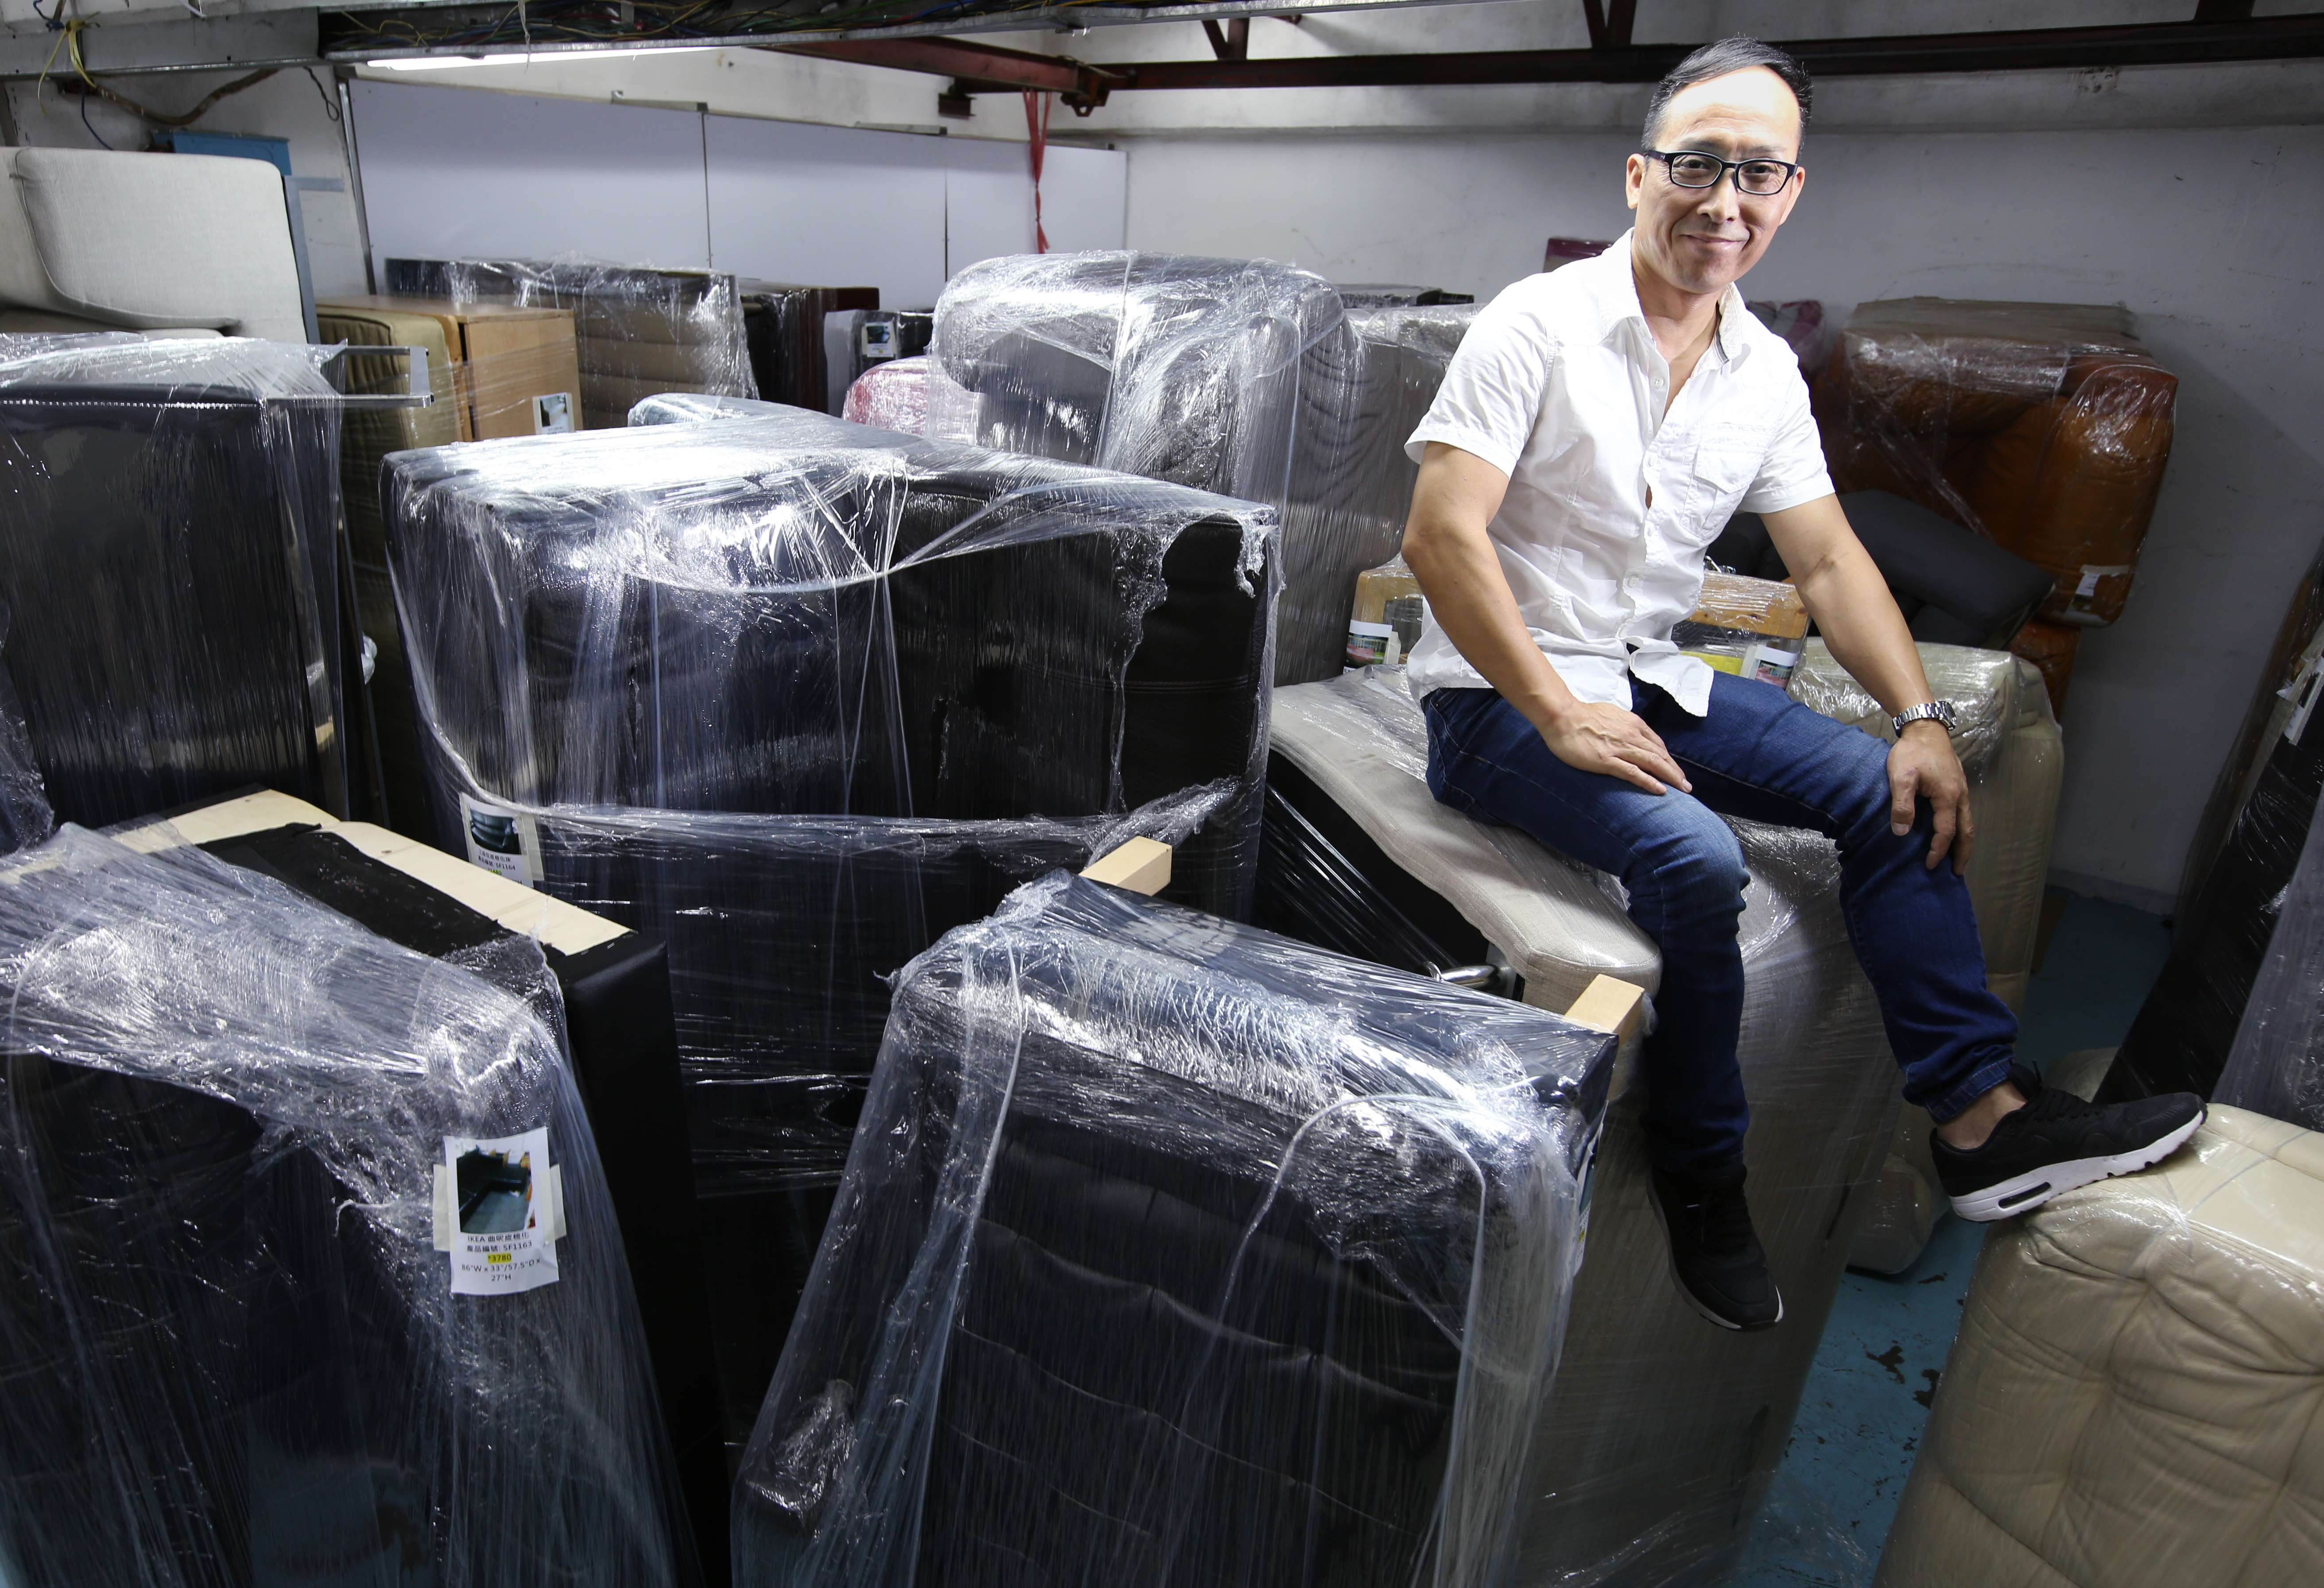 Raymond Ho, founder of Chu Kong Plan, offers his own free labour and helps with collections, deliveries and logistics. Photo: Nora Tam